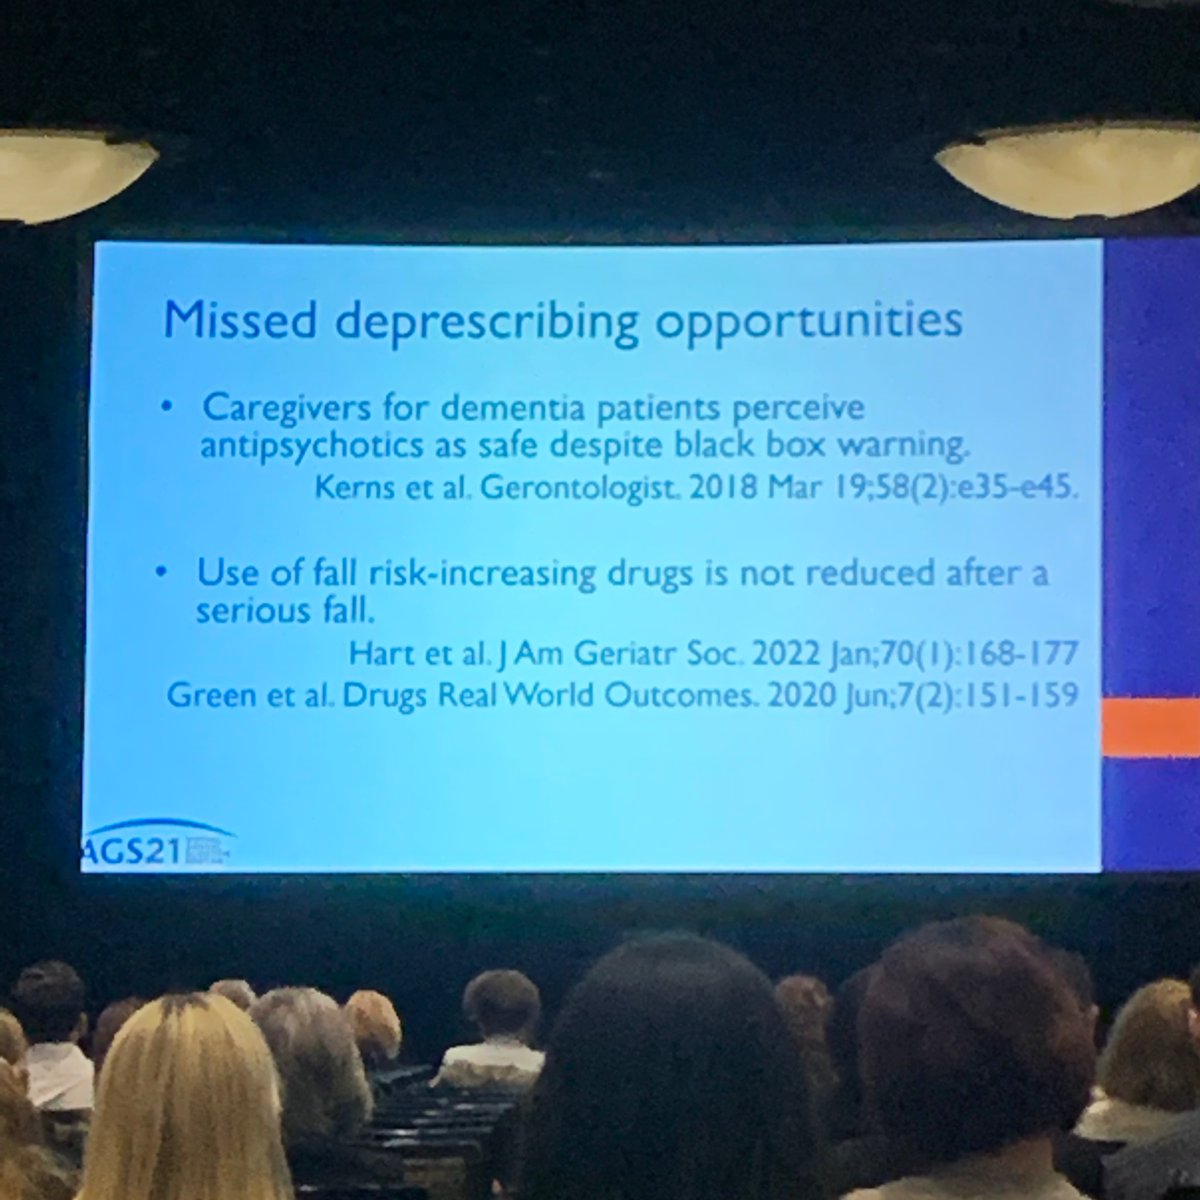 Really interesting session on getting rid of fall risk-increasing drugs by Dr Ariel Green, Dr @josh_niznik, Dr @matthew_growdon and Dr @zacharyamarcum 💊💊💊

Many deprescribing opportunities are currently not taken advantage of! 

#AGS2022 #deprescribing